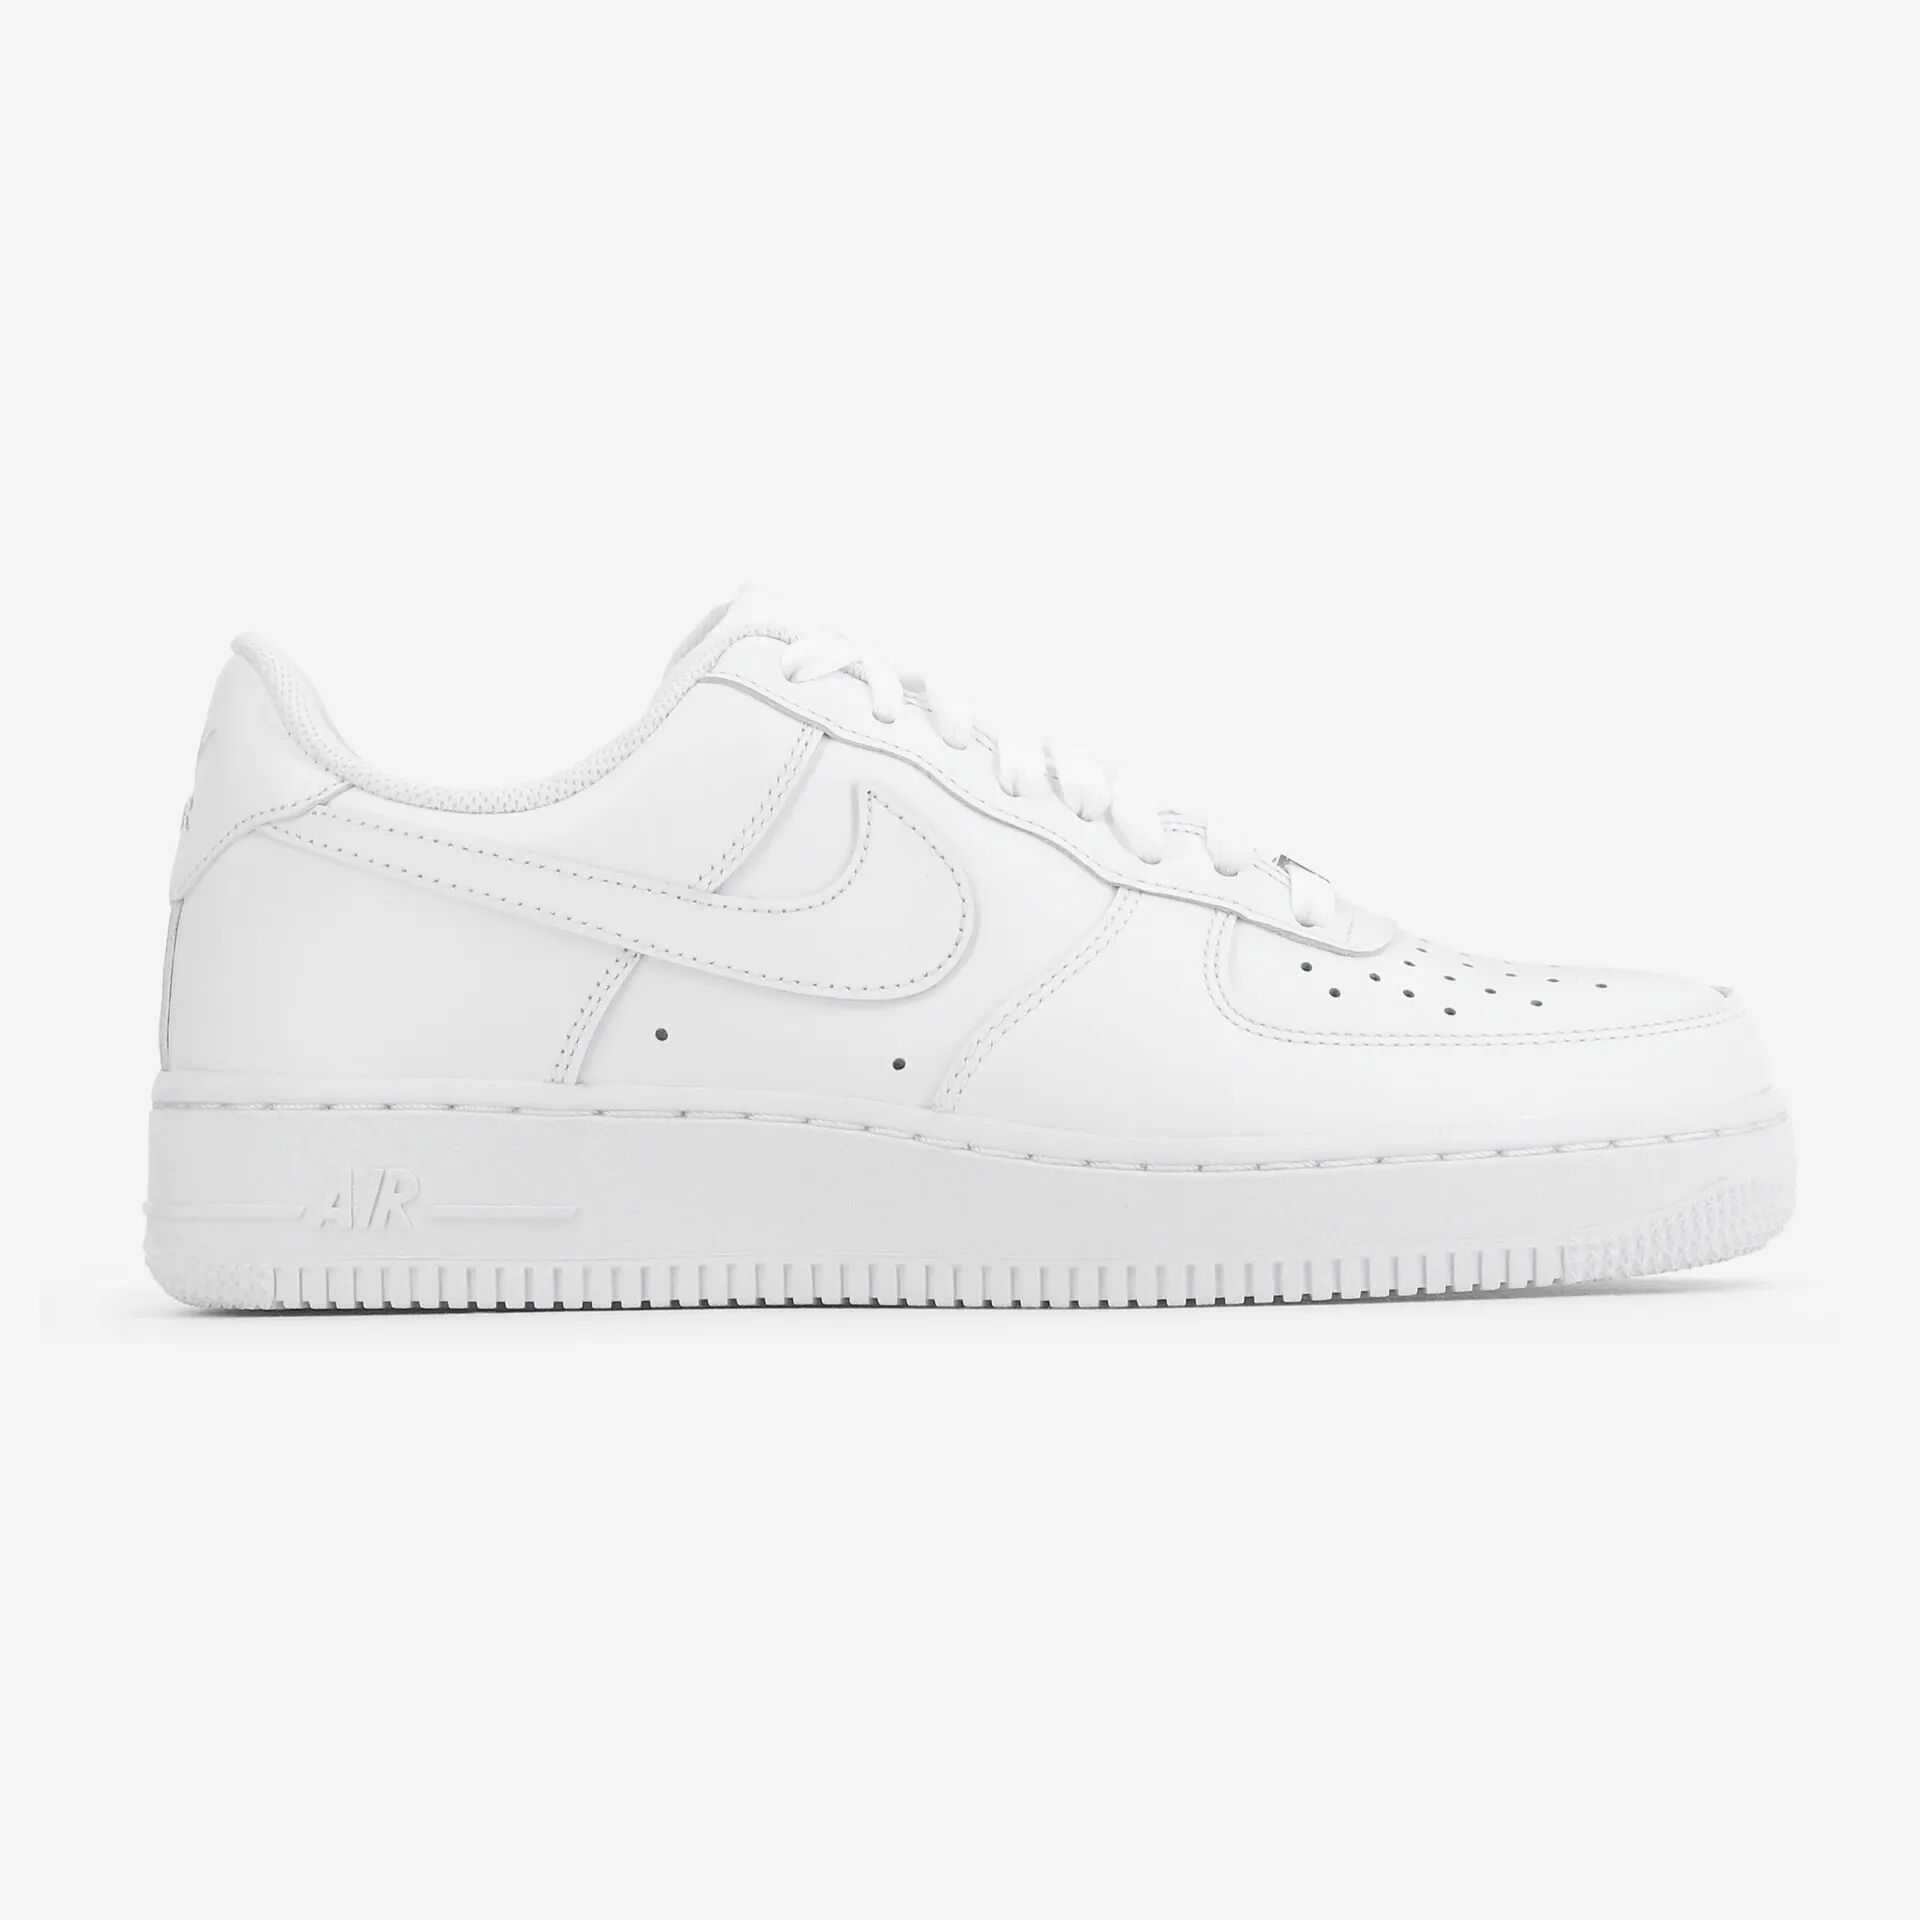 Nike Air Force 1 Low Blanc blanc 41 homme